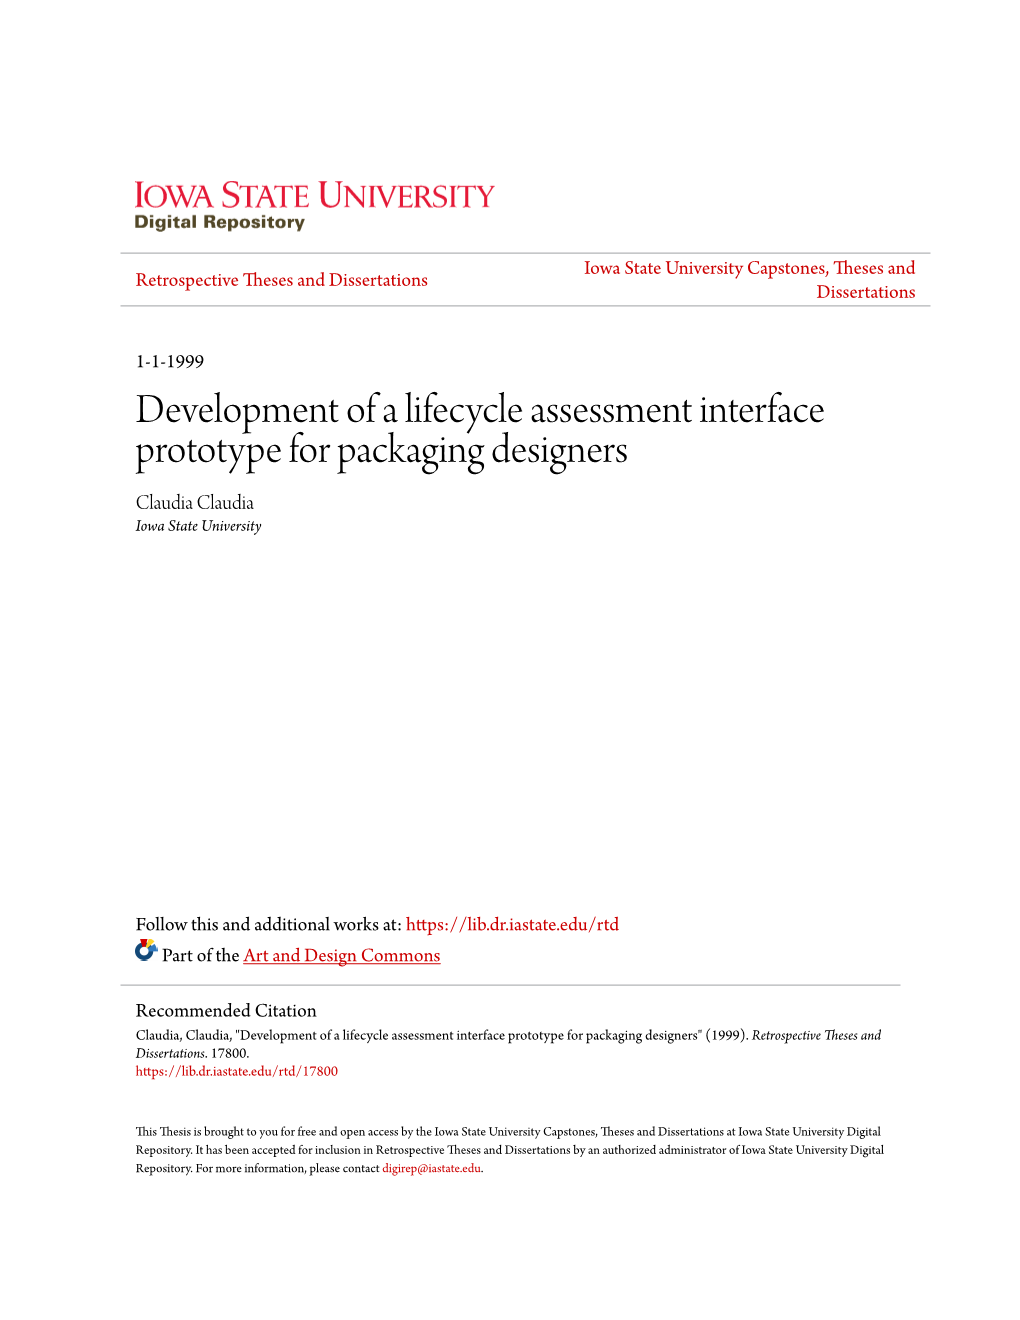 Development of a Lifecycle Assessment Interface Prototype for Packaging Designers Claudia Claudia Iowa State University